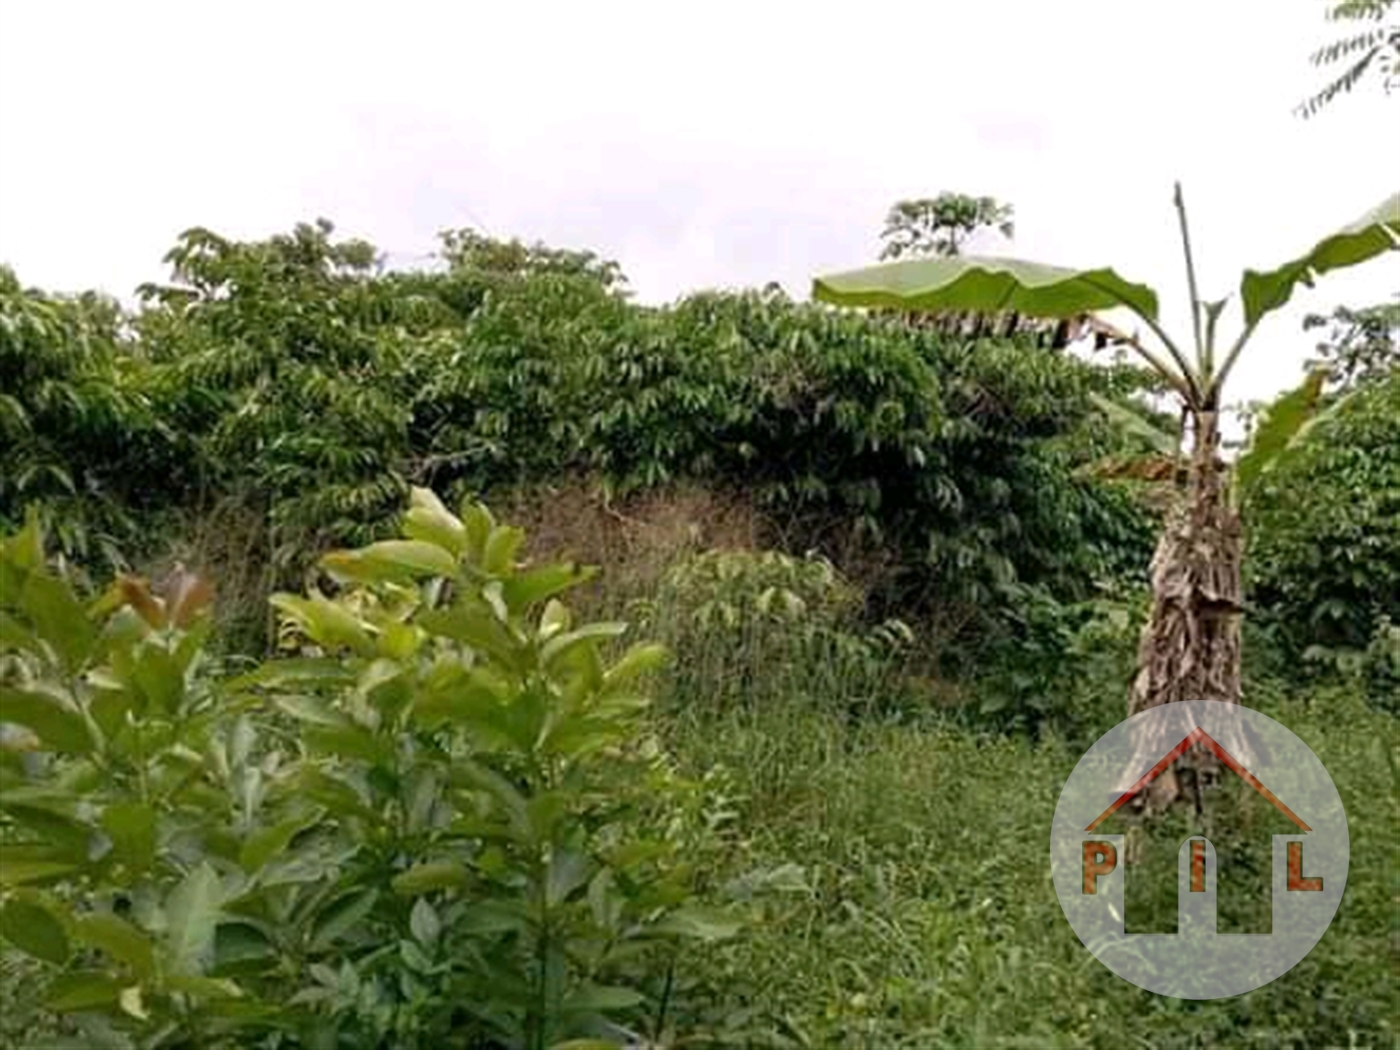 Agricultural Land for sale in Buddugala Mukono